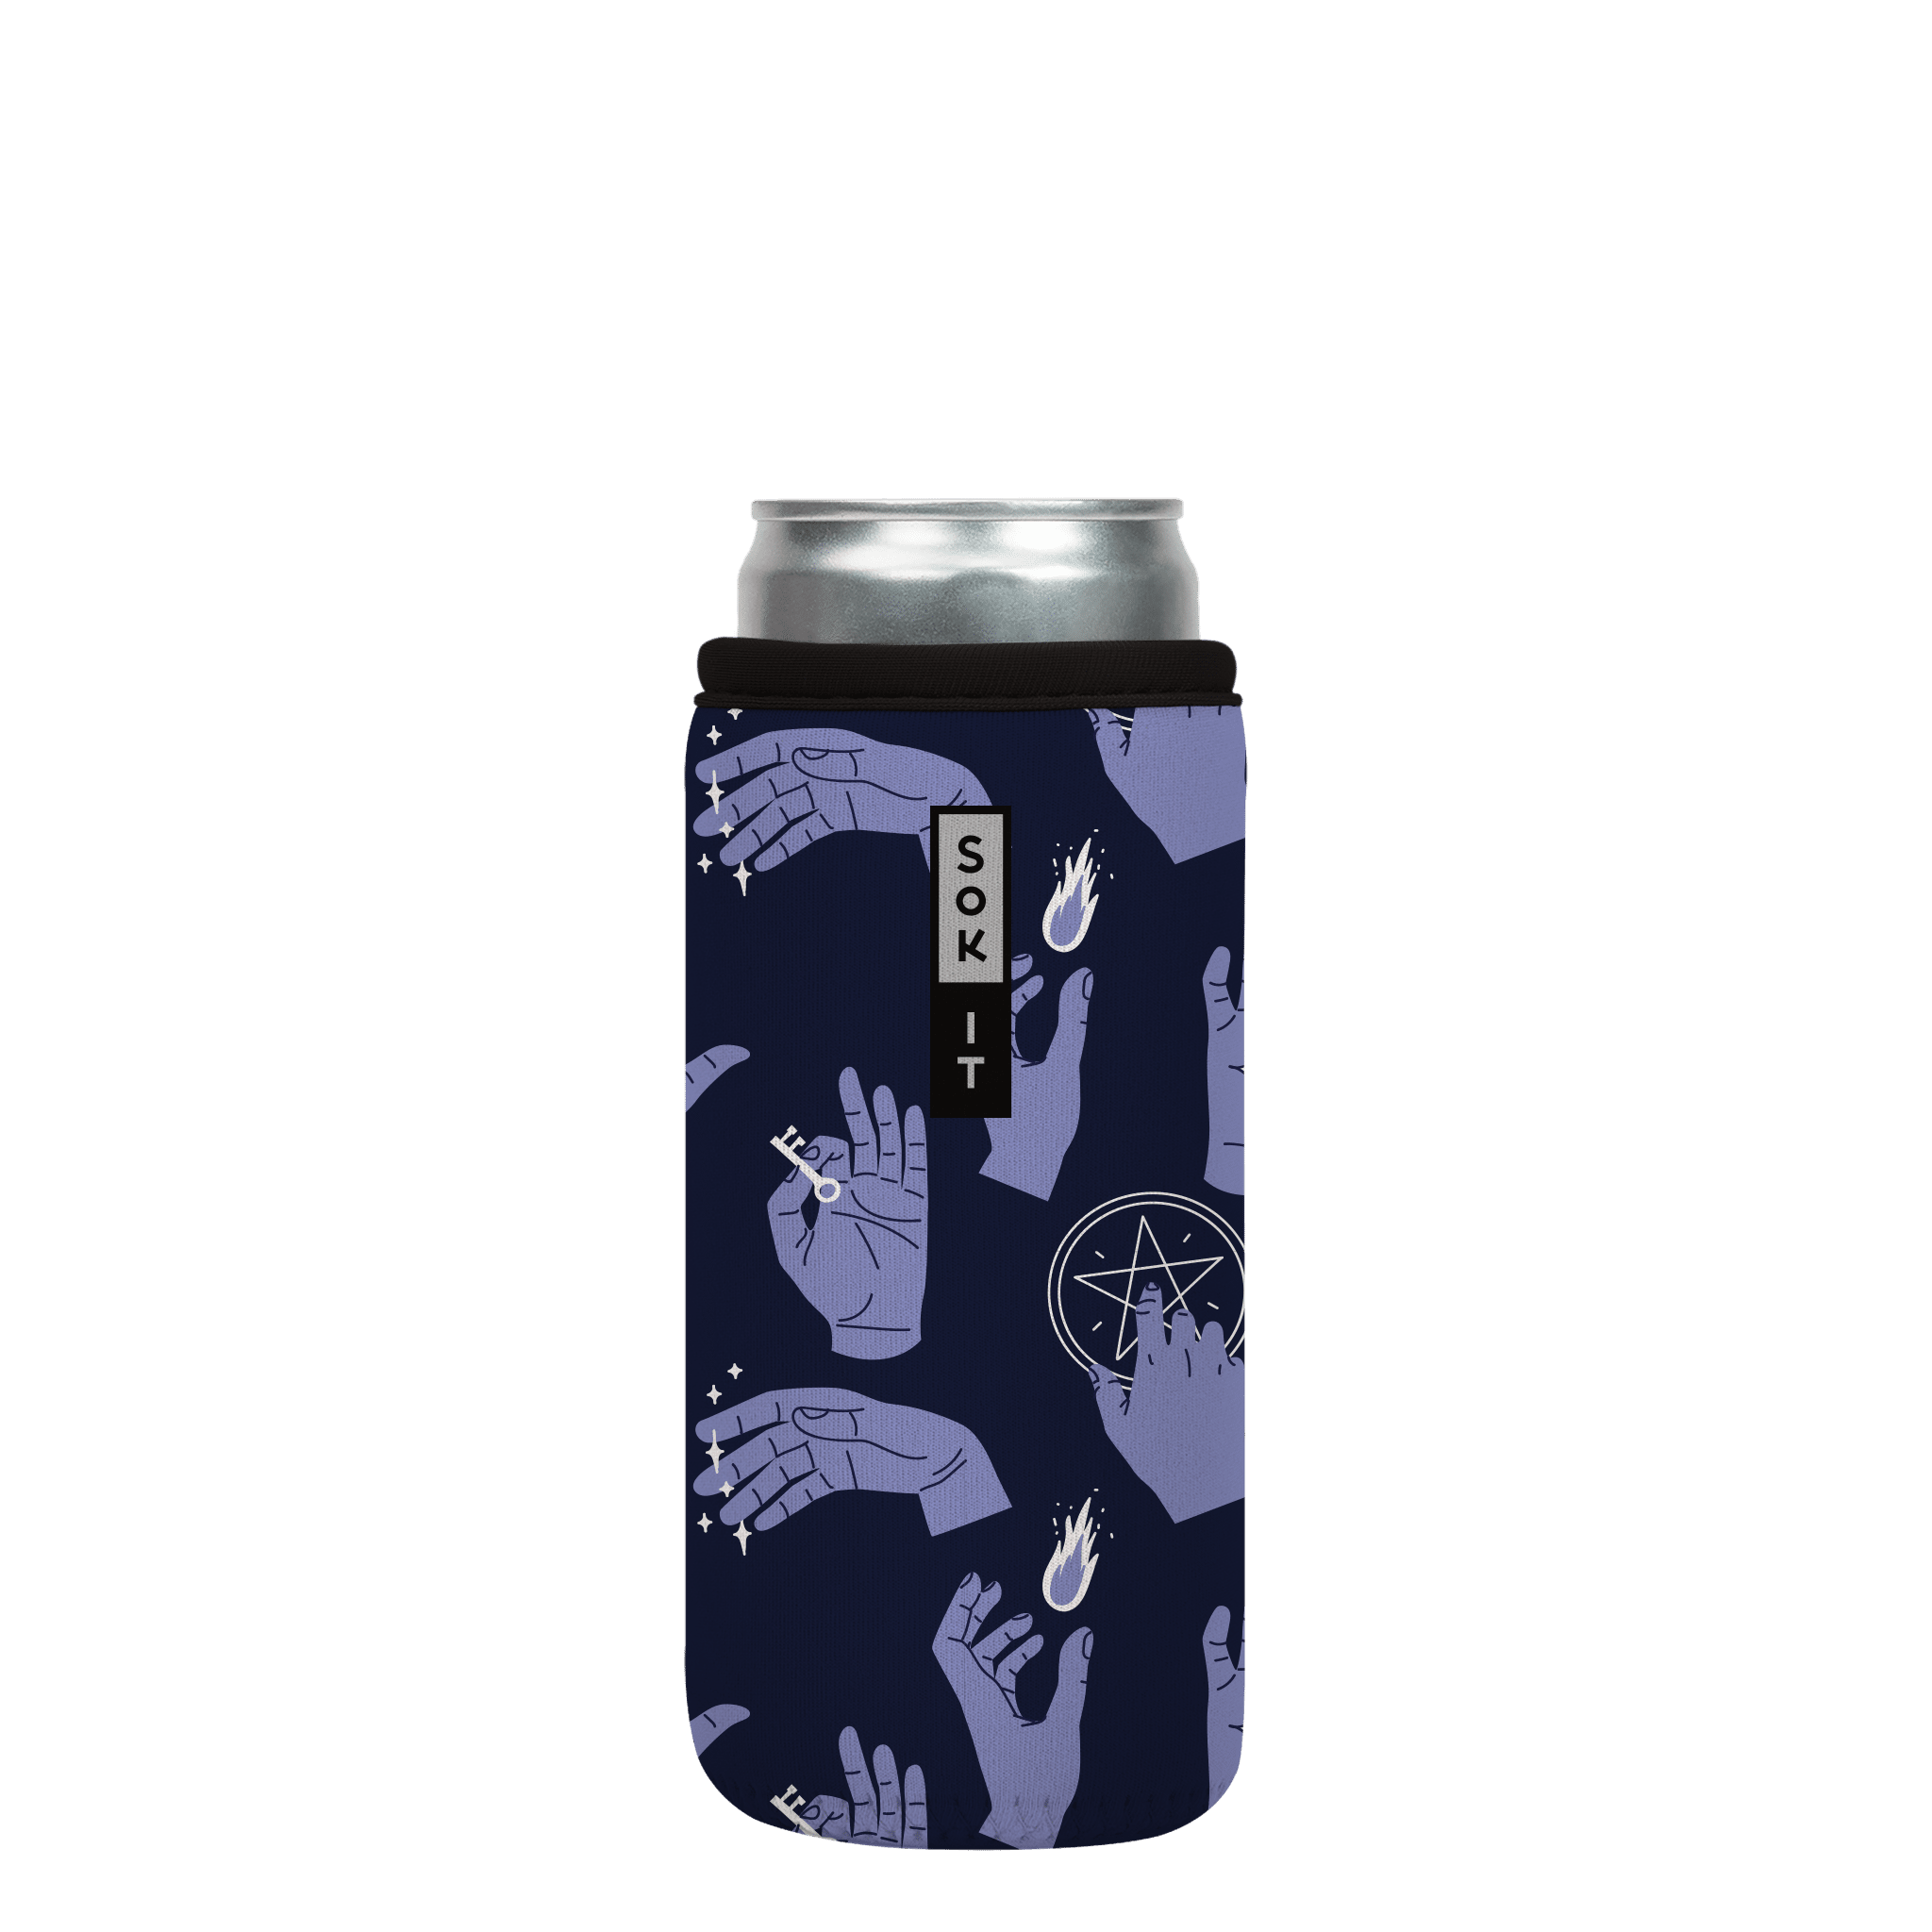 CanSok Occult Hands 12oz Slim